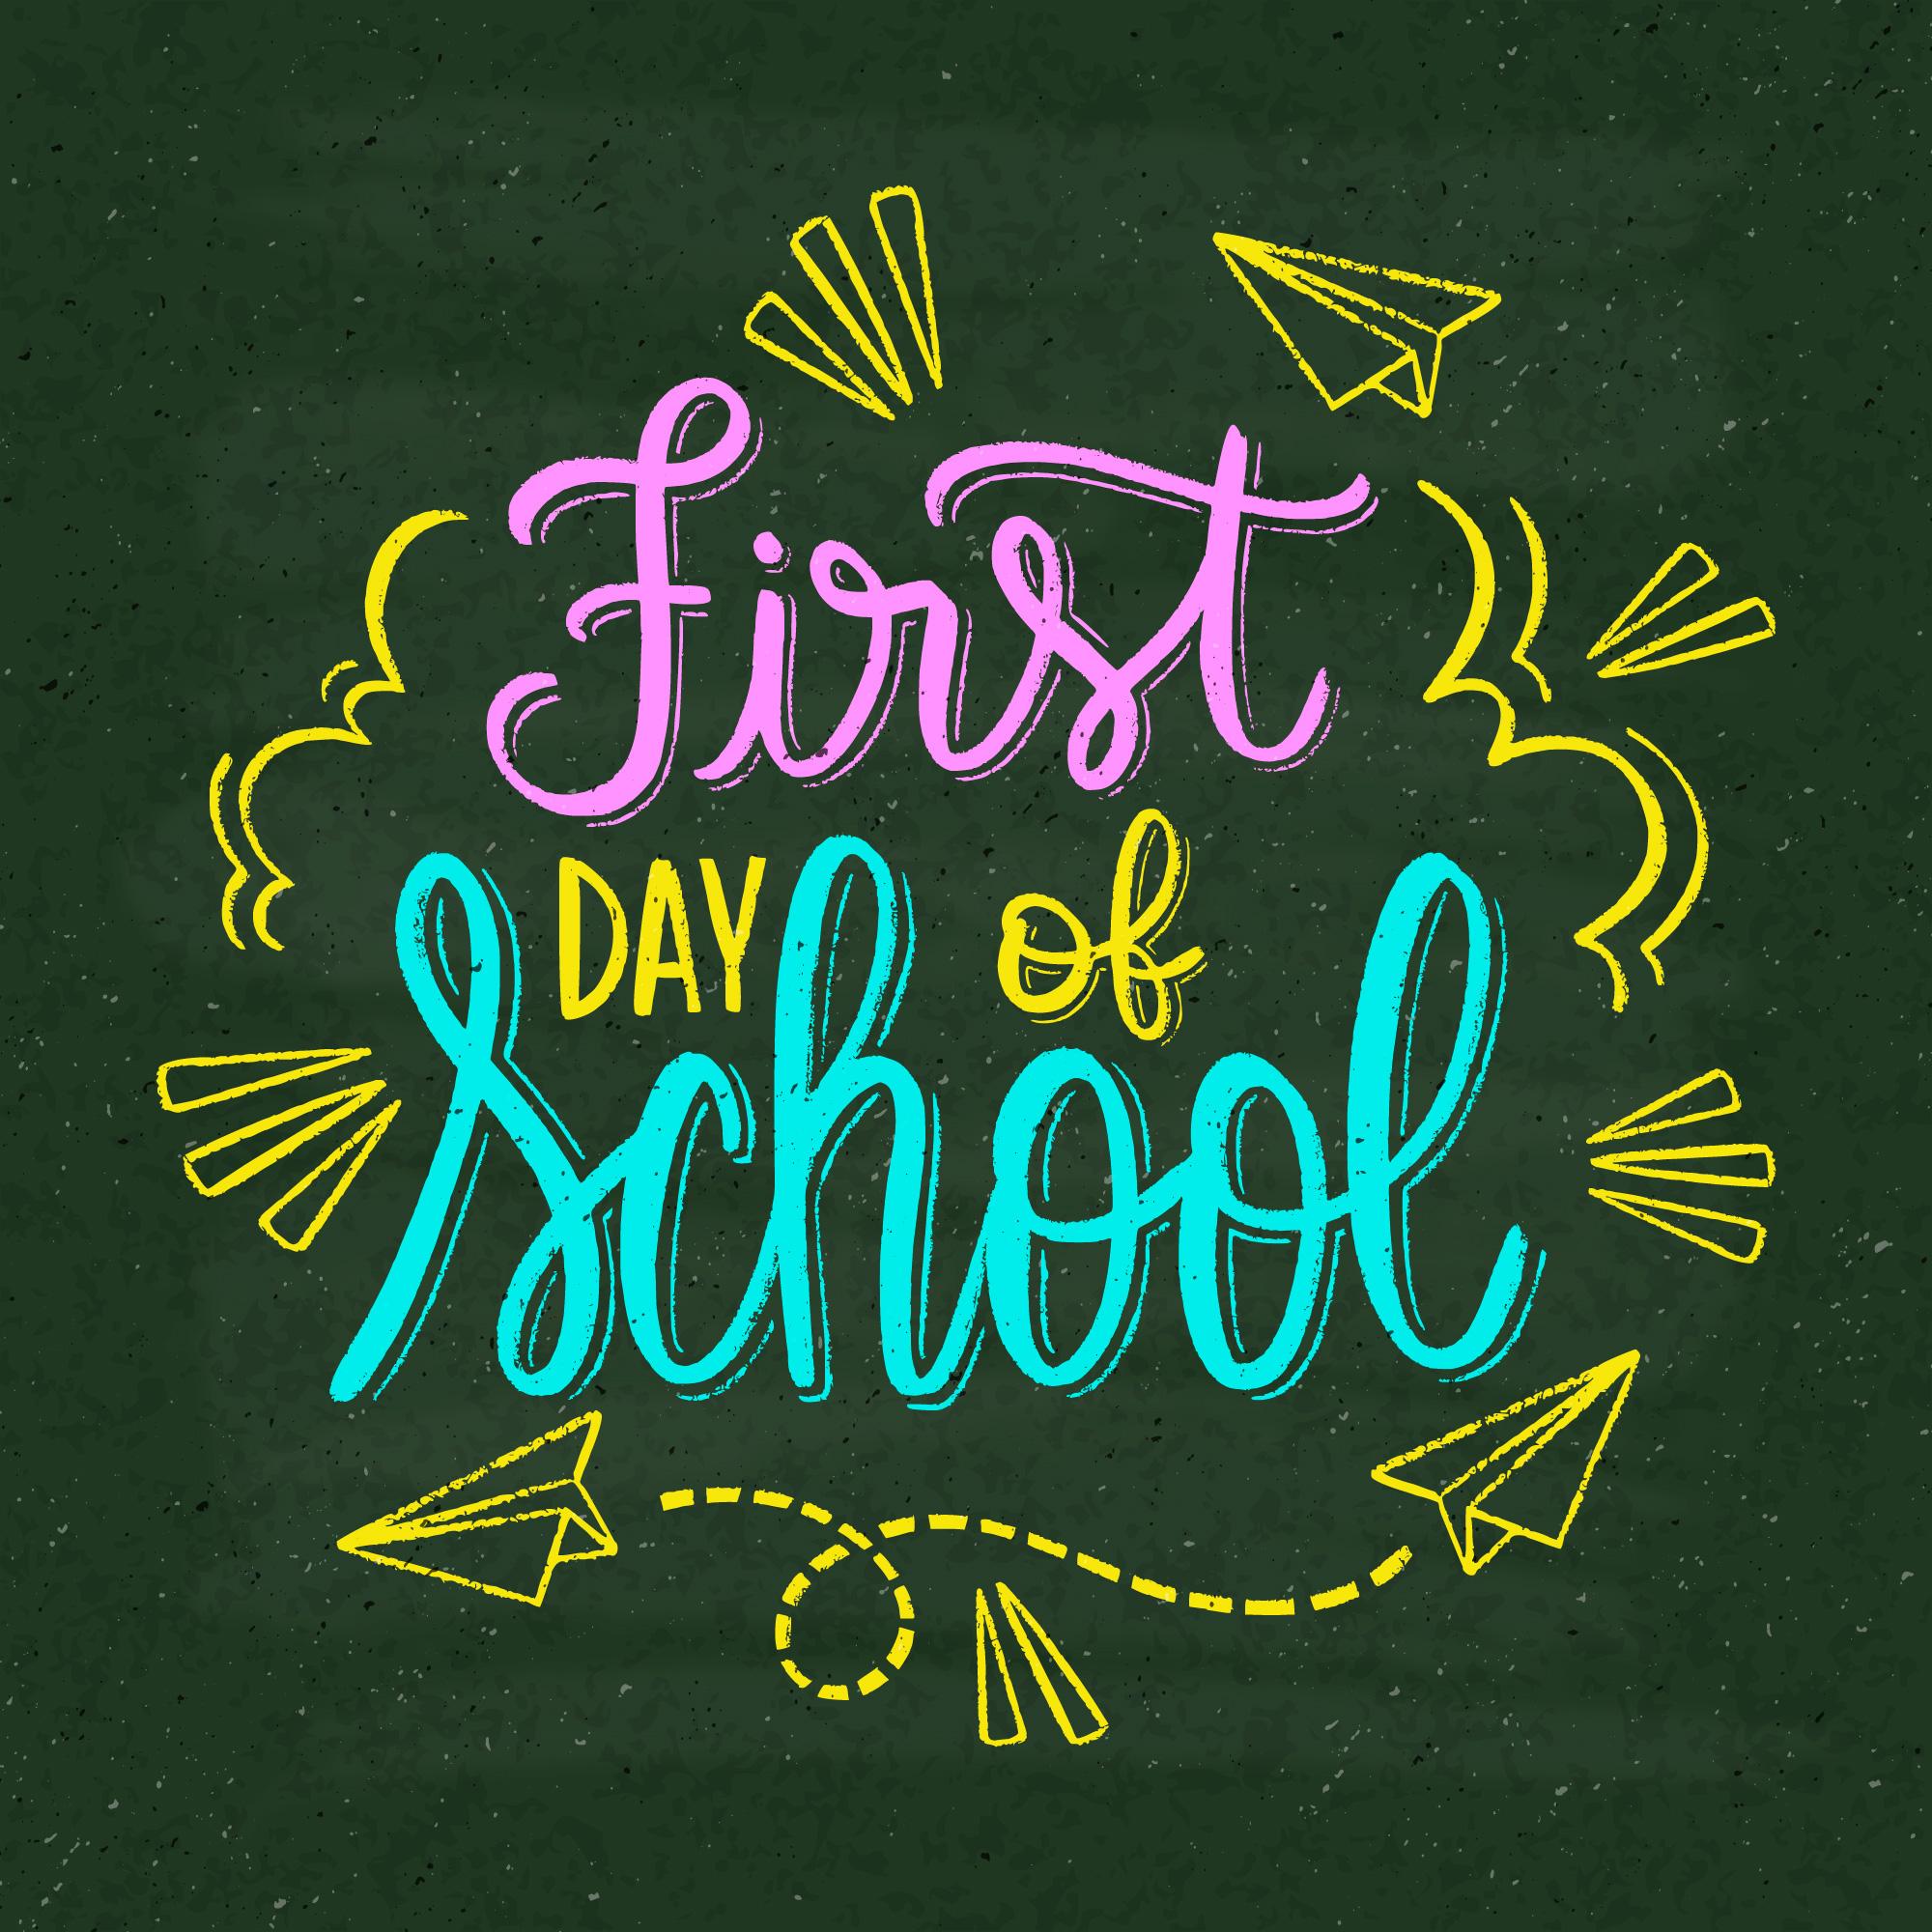 First Day of School is August 31st Dublin Consolidated School